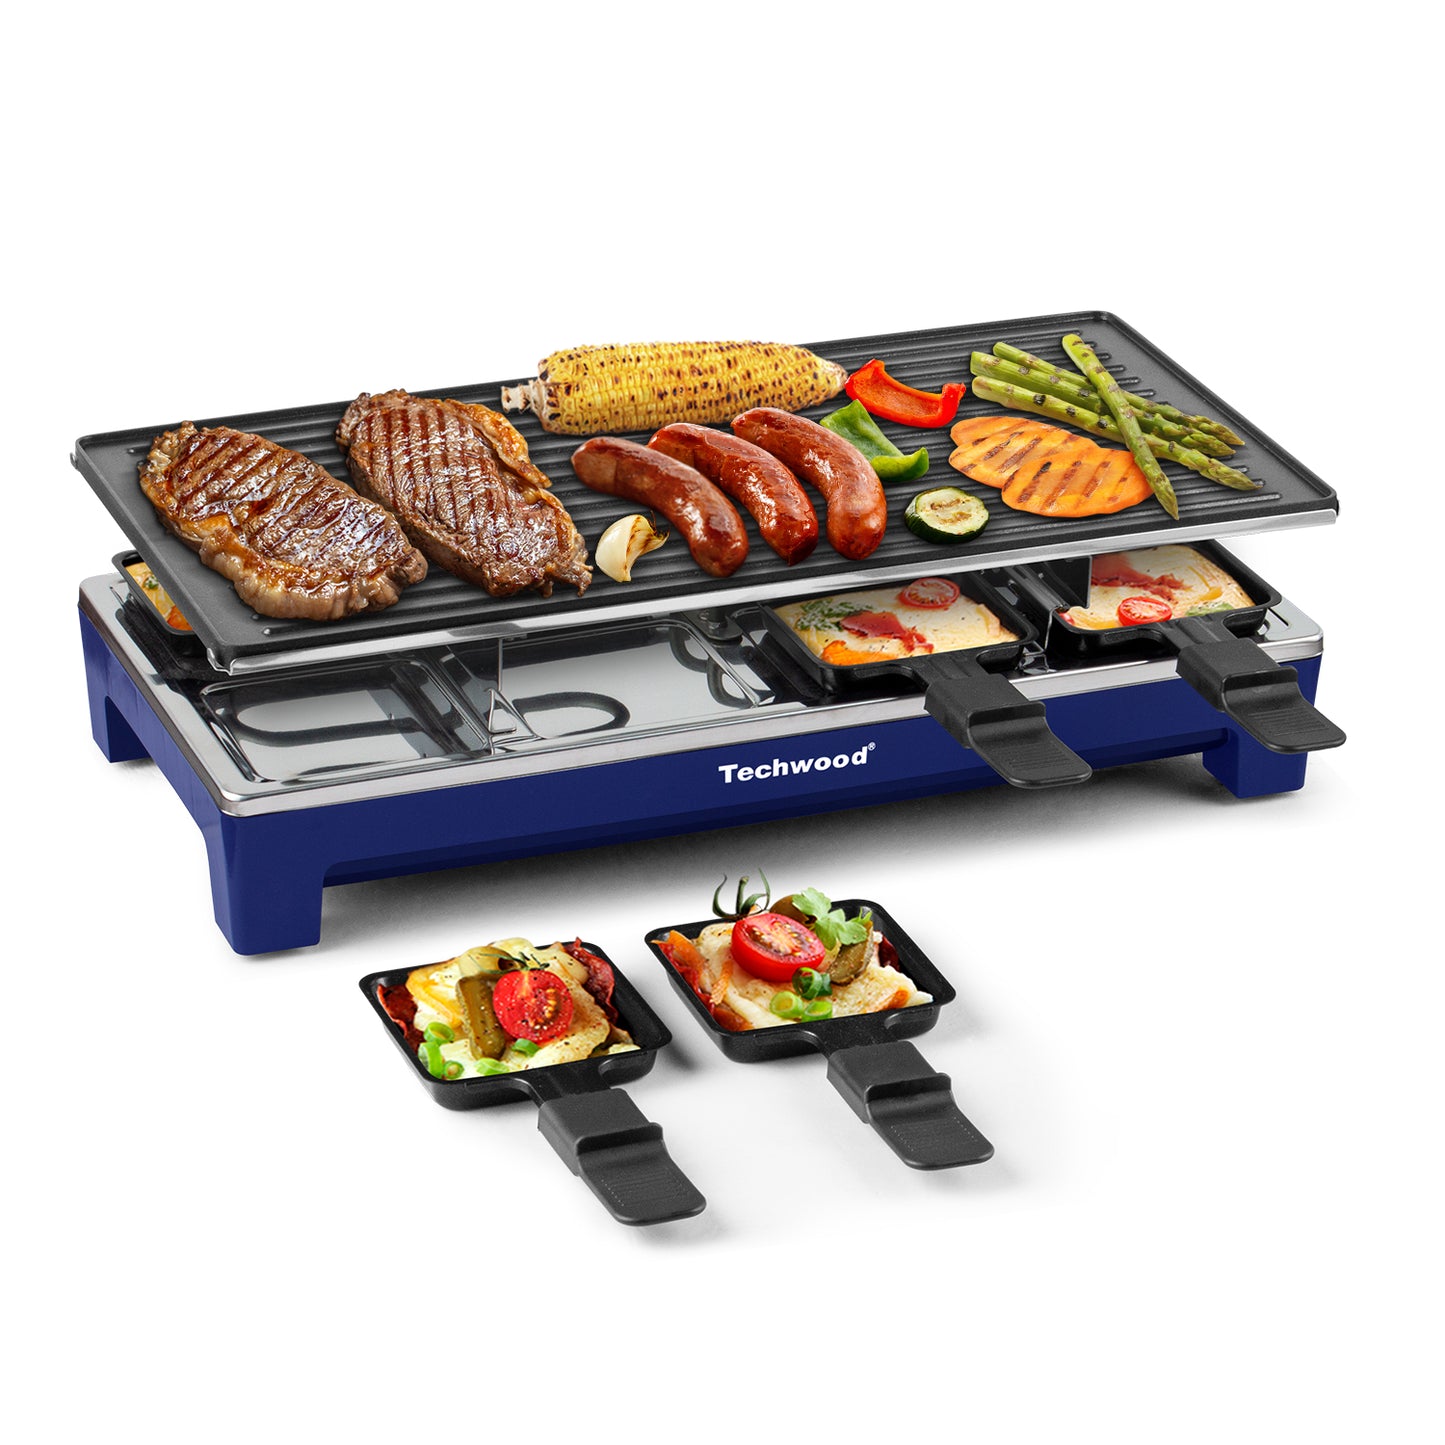 Techwood 1500W Indoor Table Grill with 8 Cheese Melting Pans(Blue)